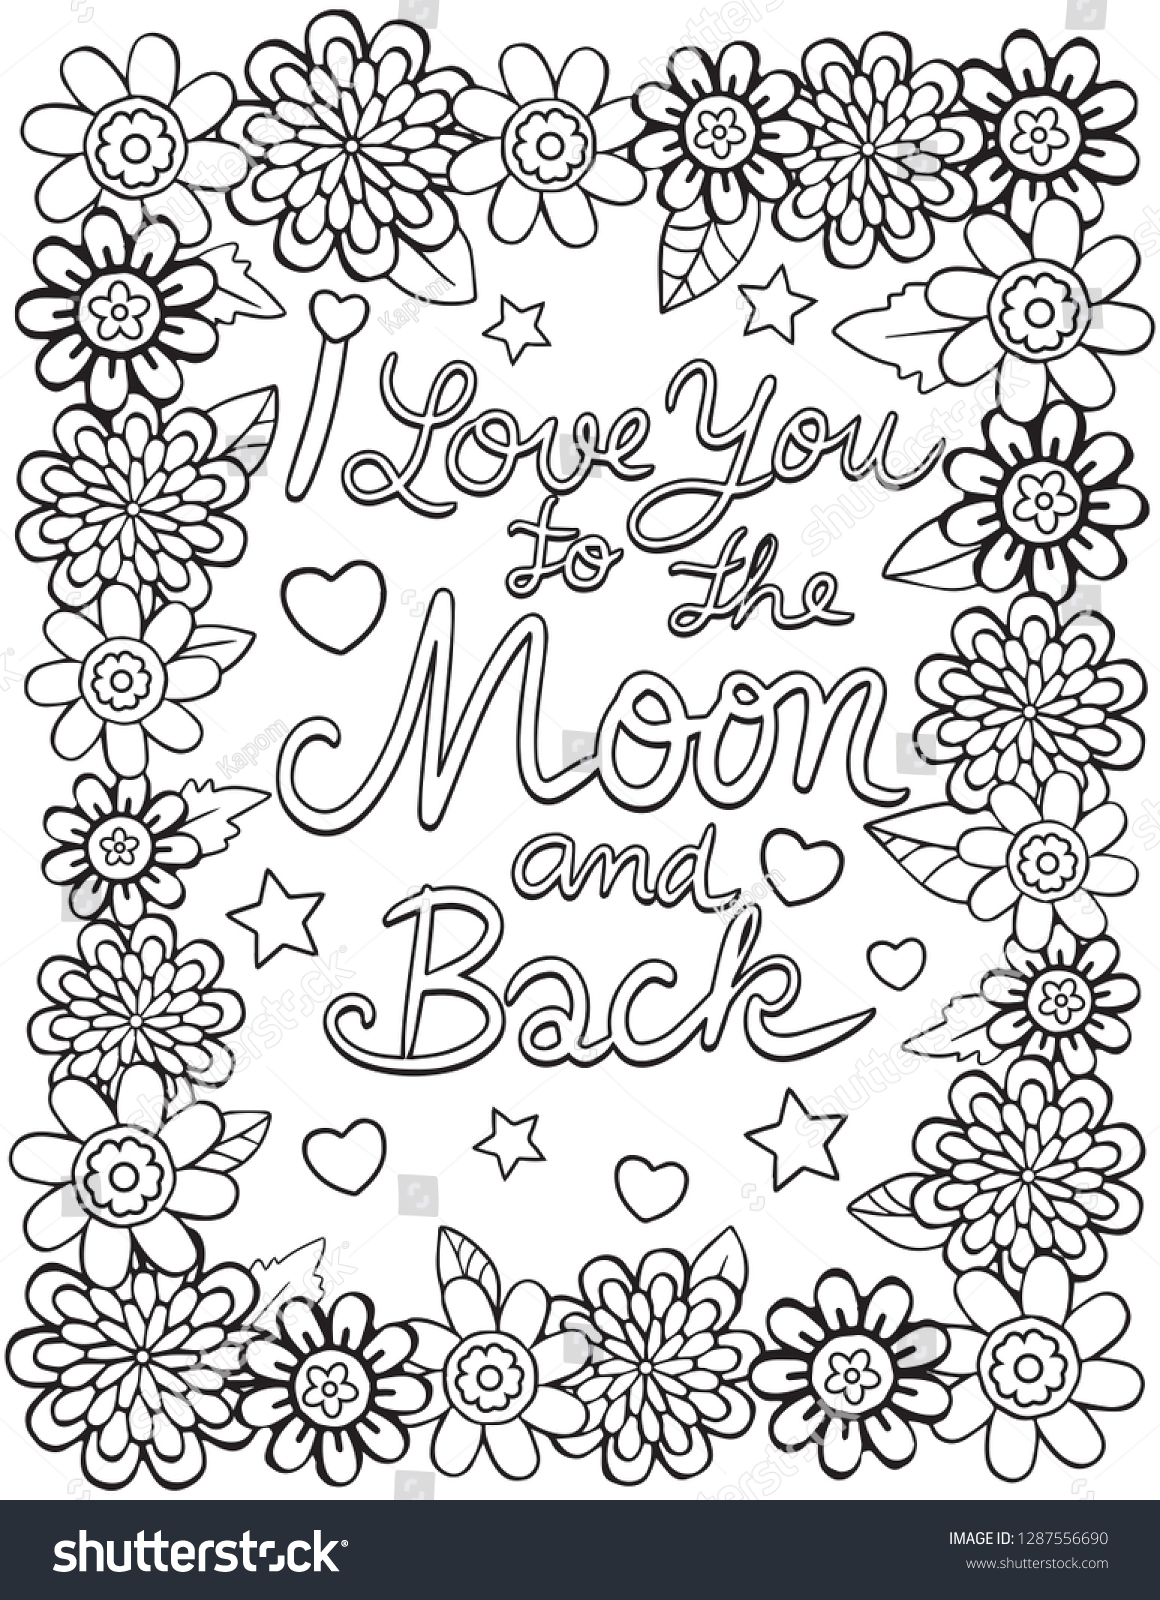 Love You Moon Back Font Flower Stock Vector Royalty Free